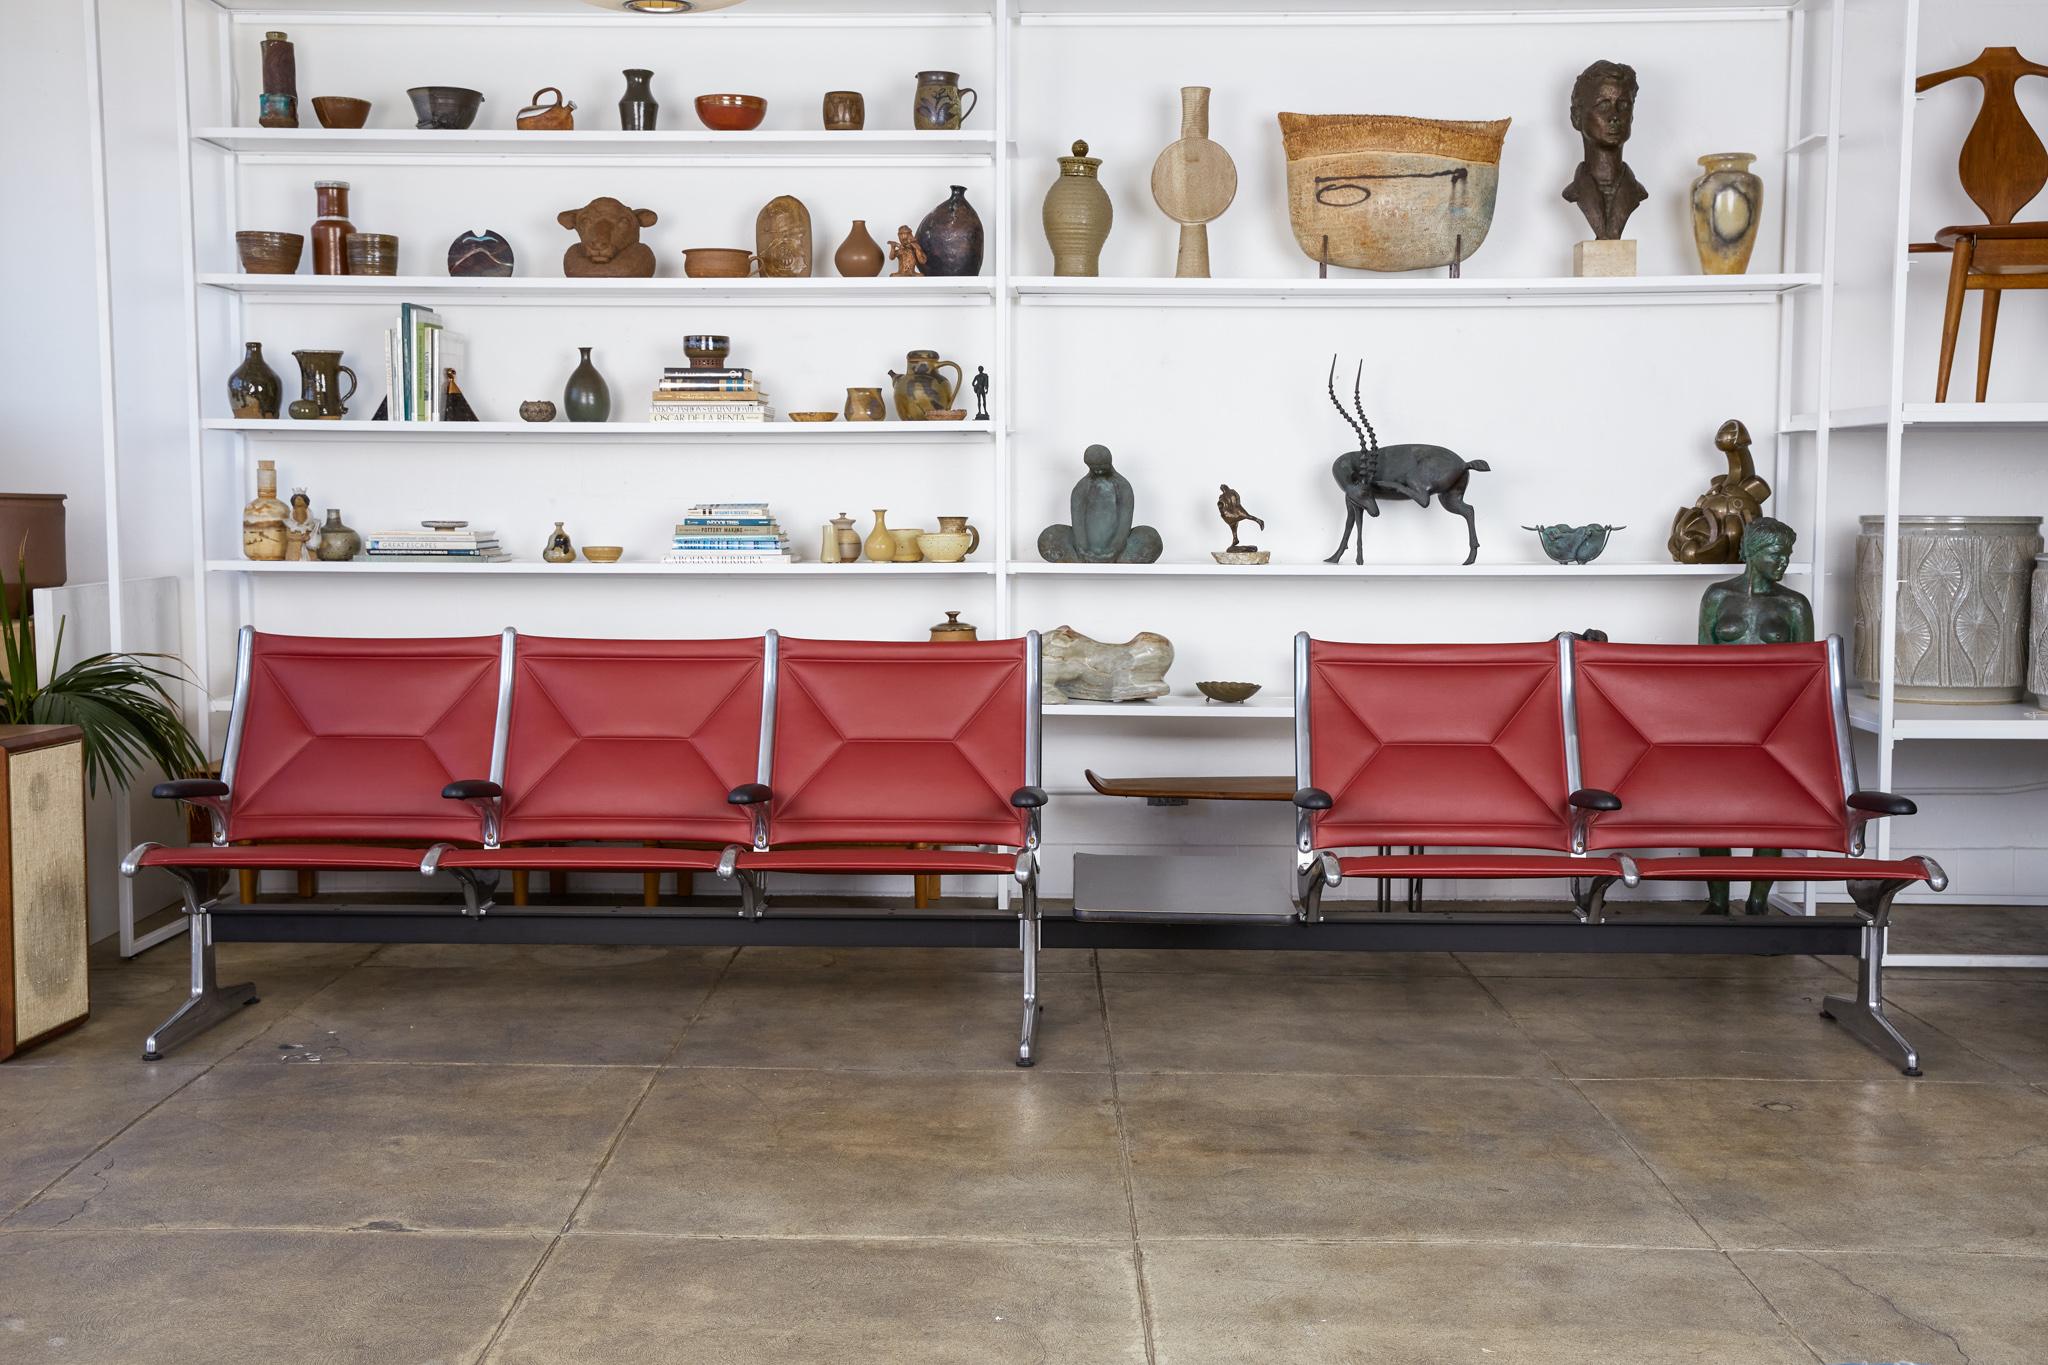 A tandem sling airport bench designed by Charles and Ray Eames for Herman Miller. In 1962 Charles and Ray Eames were commissioned to design a modular seating system for the Chicago O’Hare and Washington D.C. Dulles airports. They based the design